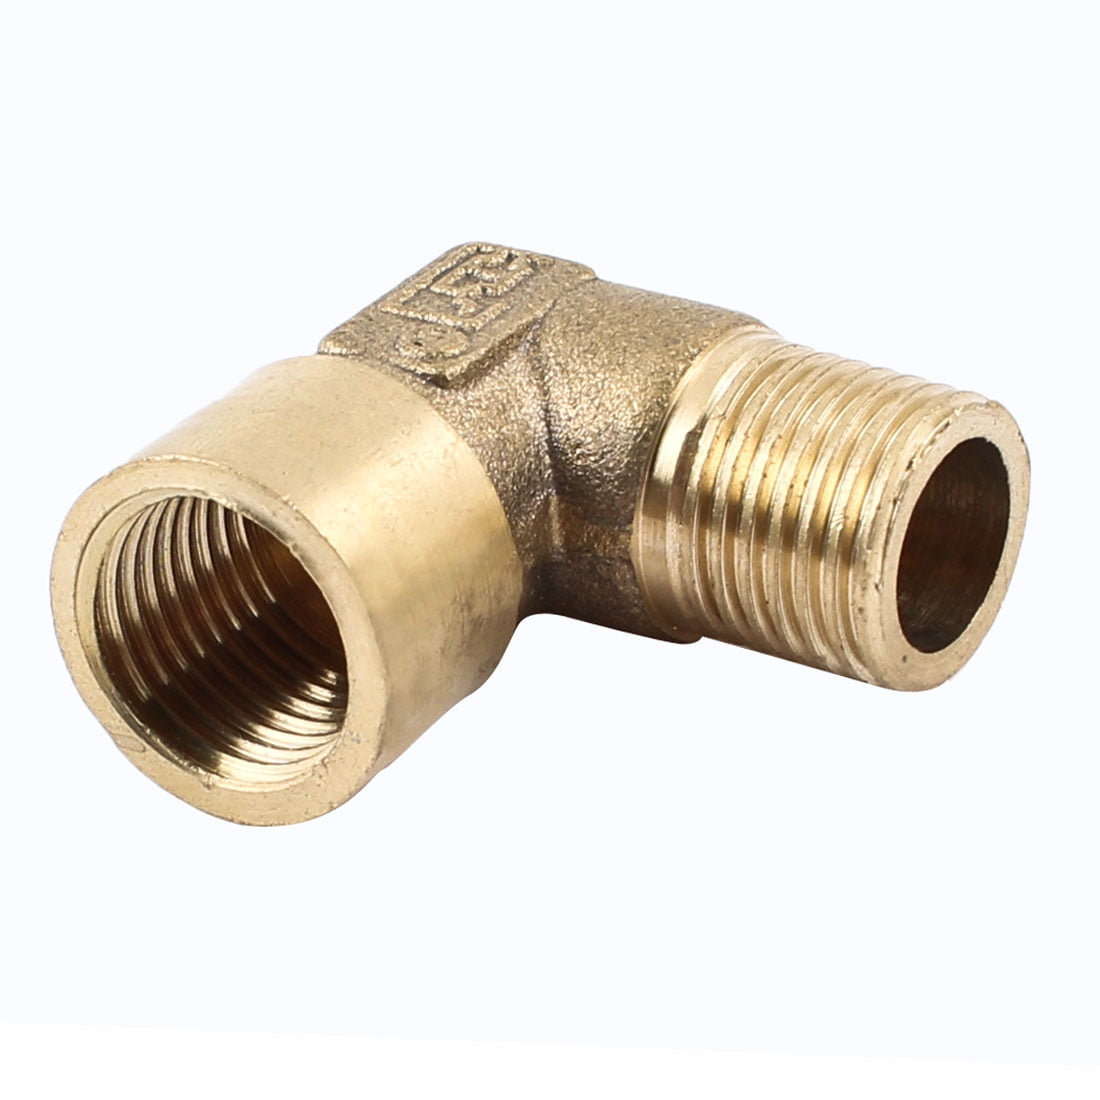 Brass 90 Degree Elbow 1/4" PT Male to 1/4"PT Male Pipe Fitting Coupler 